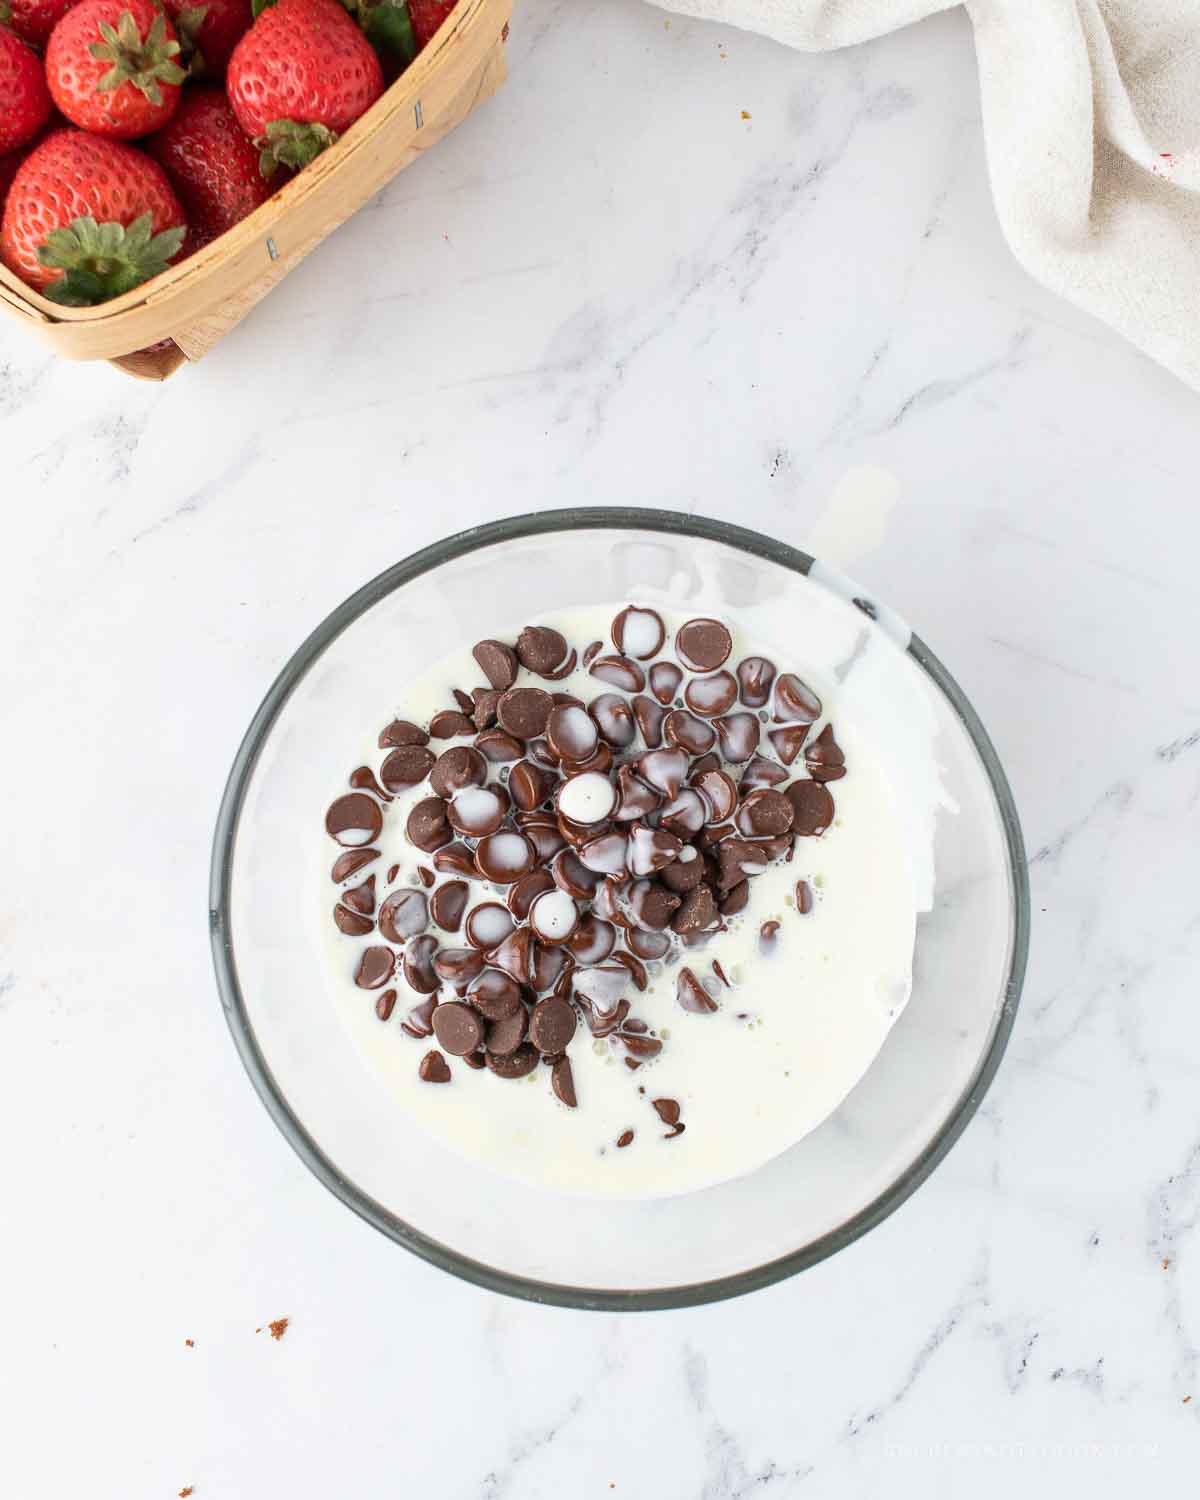 Cream and chocolate in a microwave safe bowl.